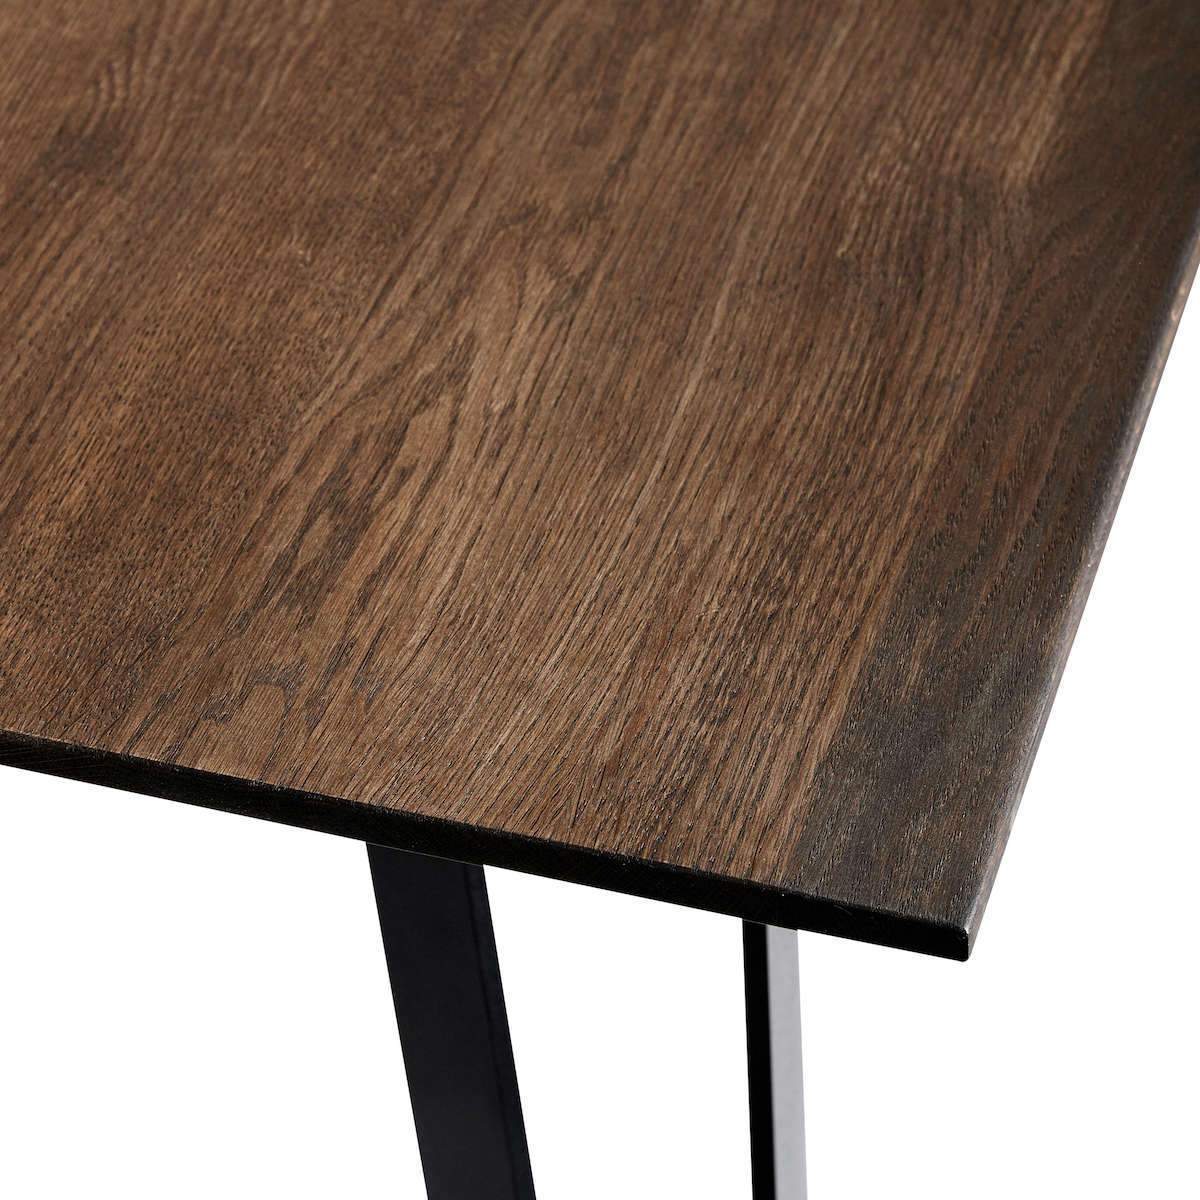 Muubs Space Dining Table Smoked Oak, 220cm